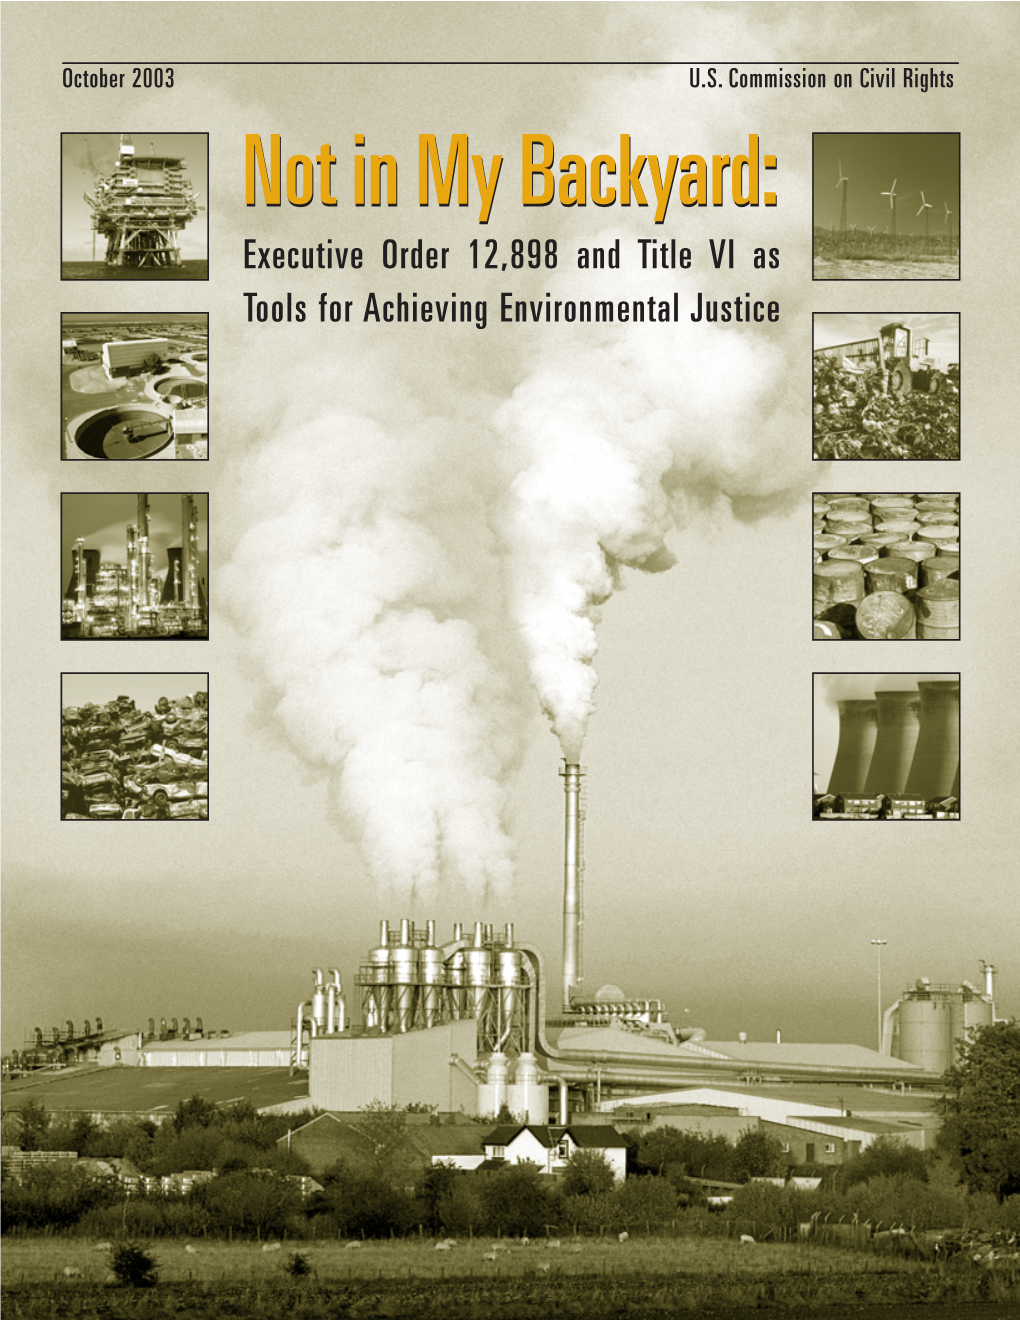 Not in My Backyard: Executive Order 12,898 and Title VI As Tools for Achieving Environmental Justice